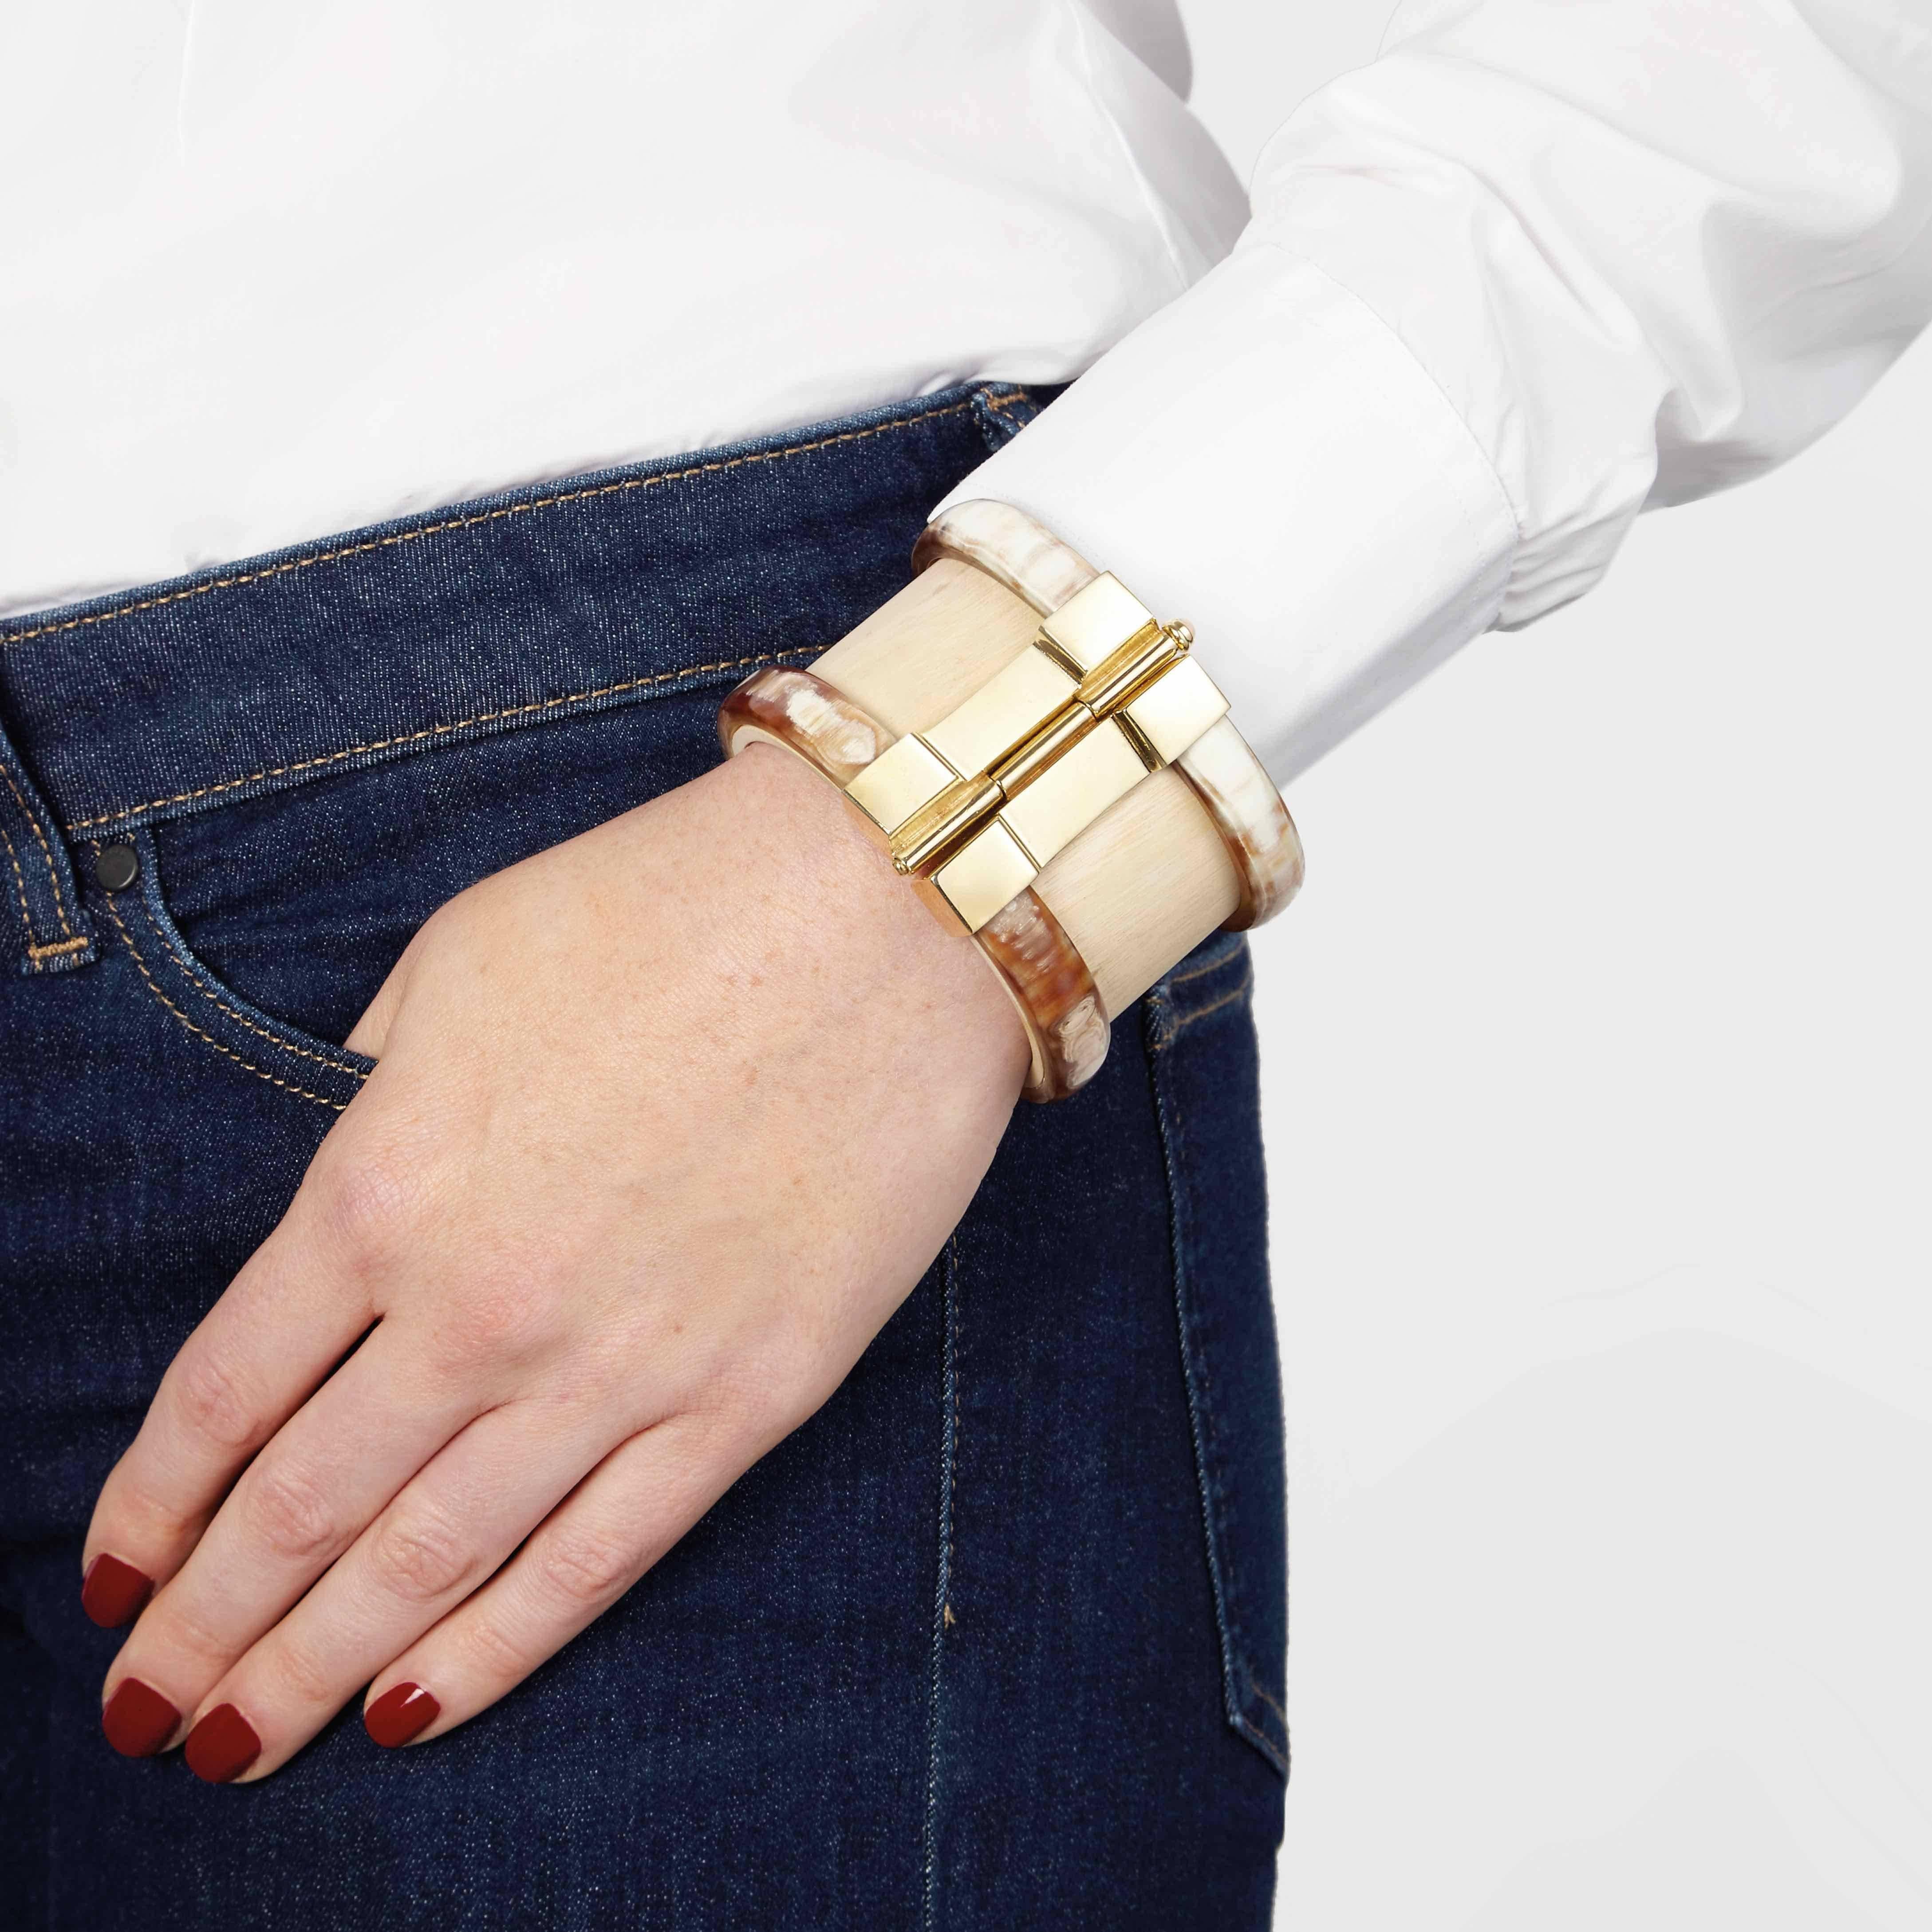 Cuff bracelet crafted by hand from jacaranda wood and African cow horn. The customizable 18k gold plate pin-clasp is set with a choice of emerald, ruby or fire-opal cabochon. 

Hand crafted by artisans in Kenya, East Africa and finished by hand to